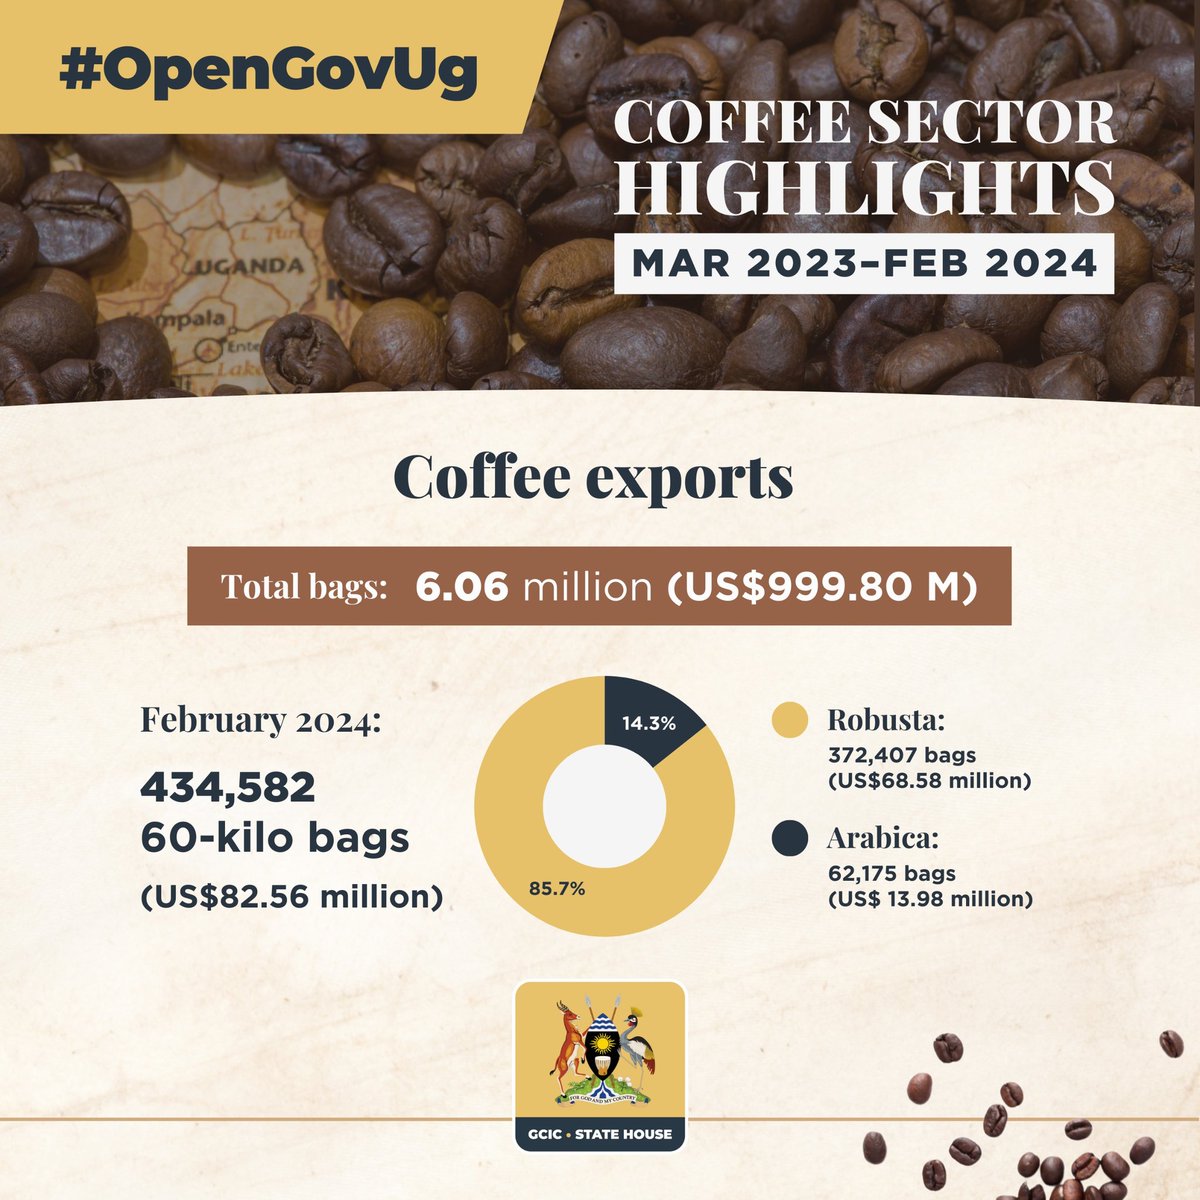 Coffee exports in February 2024 amounted to 434,582 60-kilo bags, worth $ 82.56 million. #OpenGovUg